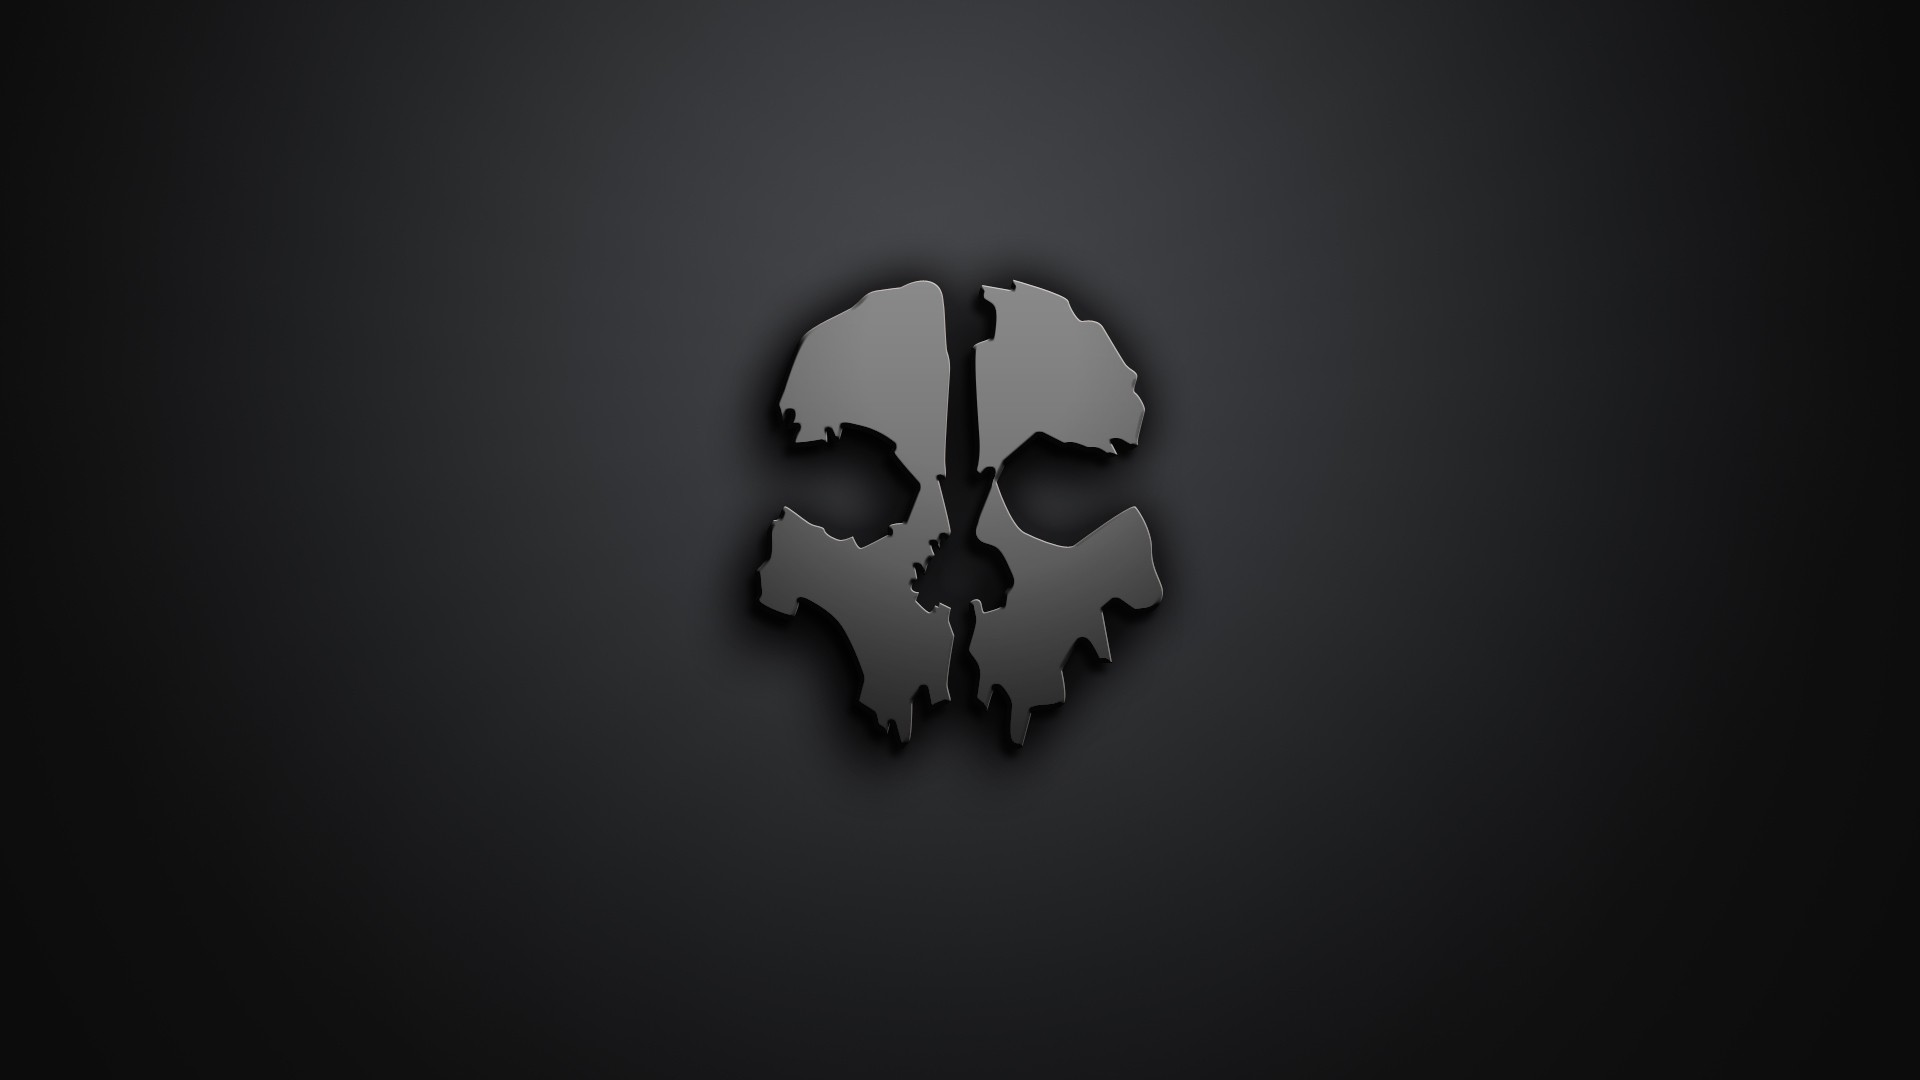 General 1920x1080 skull artwork minimalism gray background Call of Duty Call of Duty: Ghosts PC gaming gradient simple background video game art